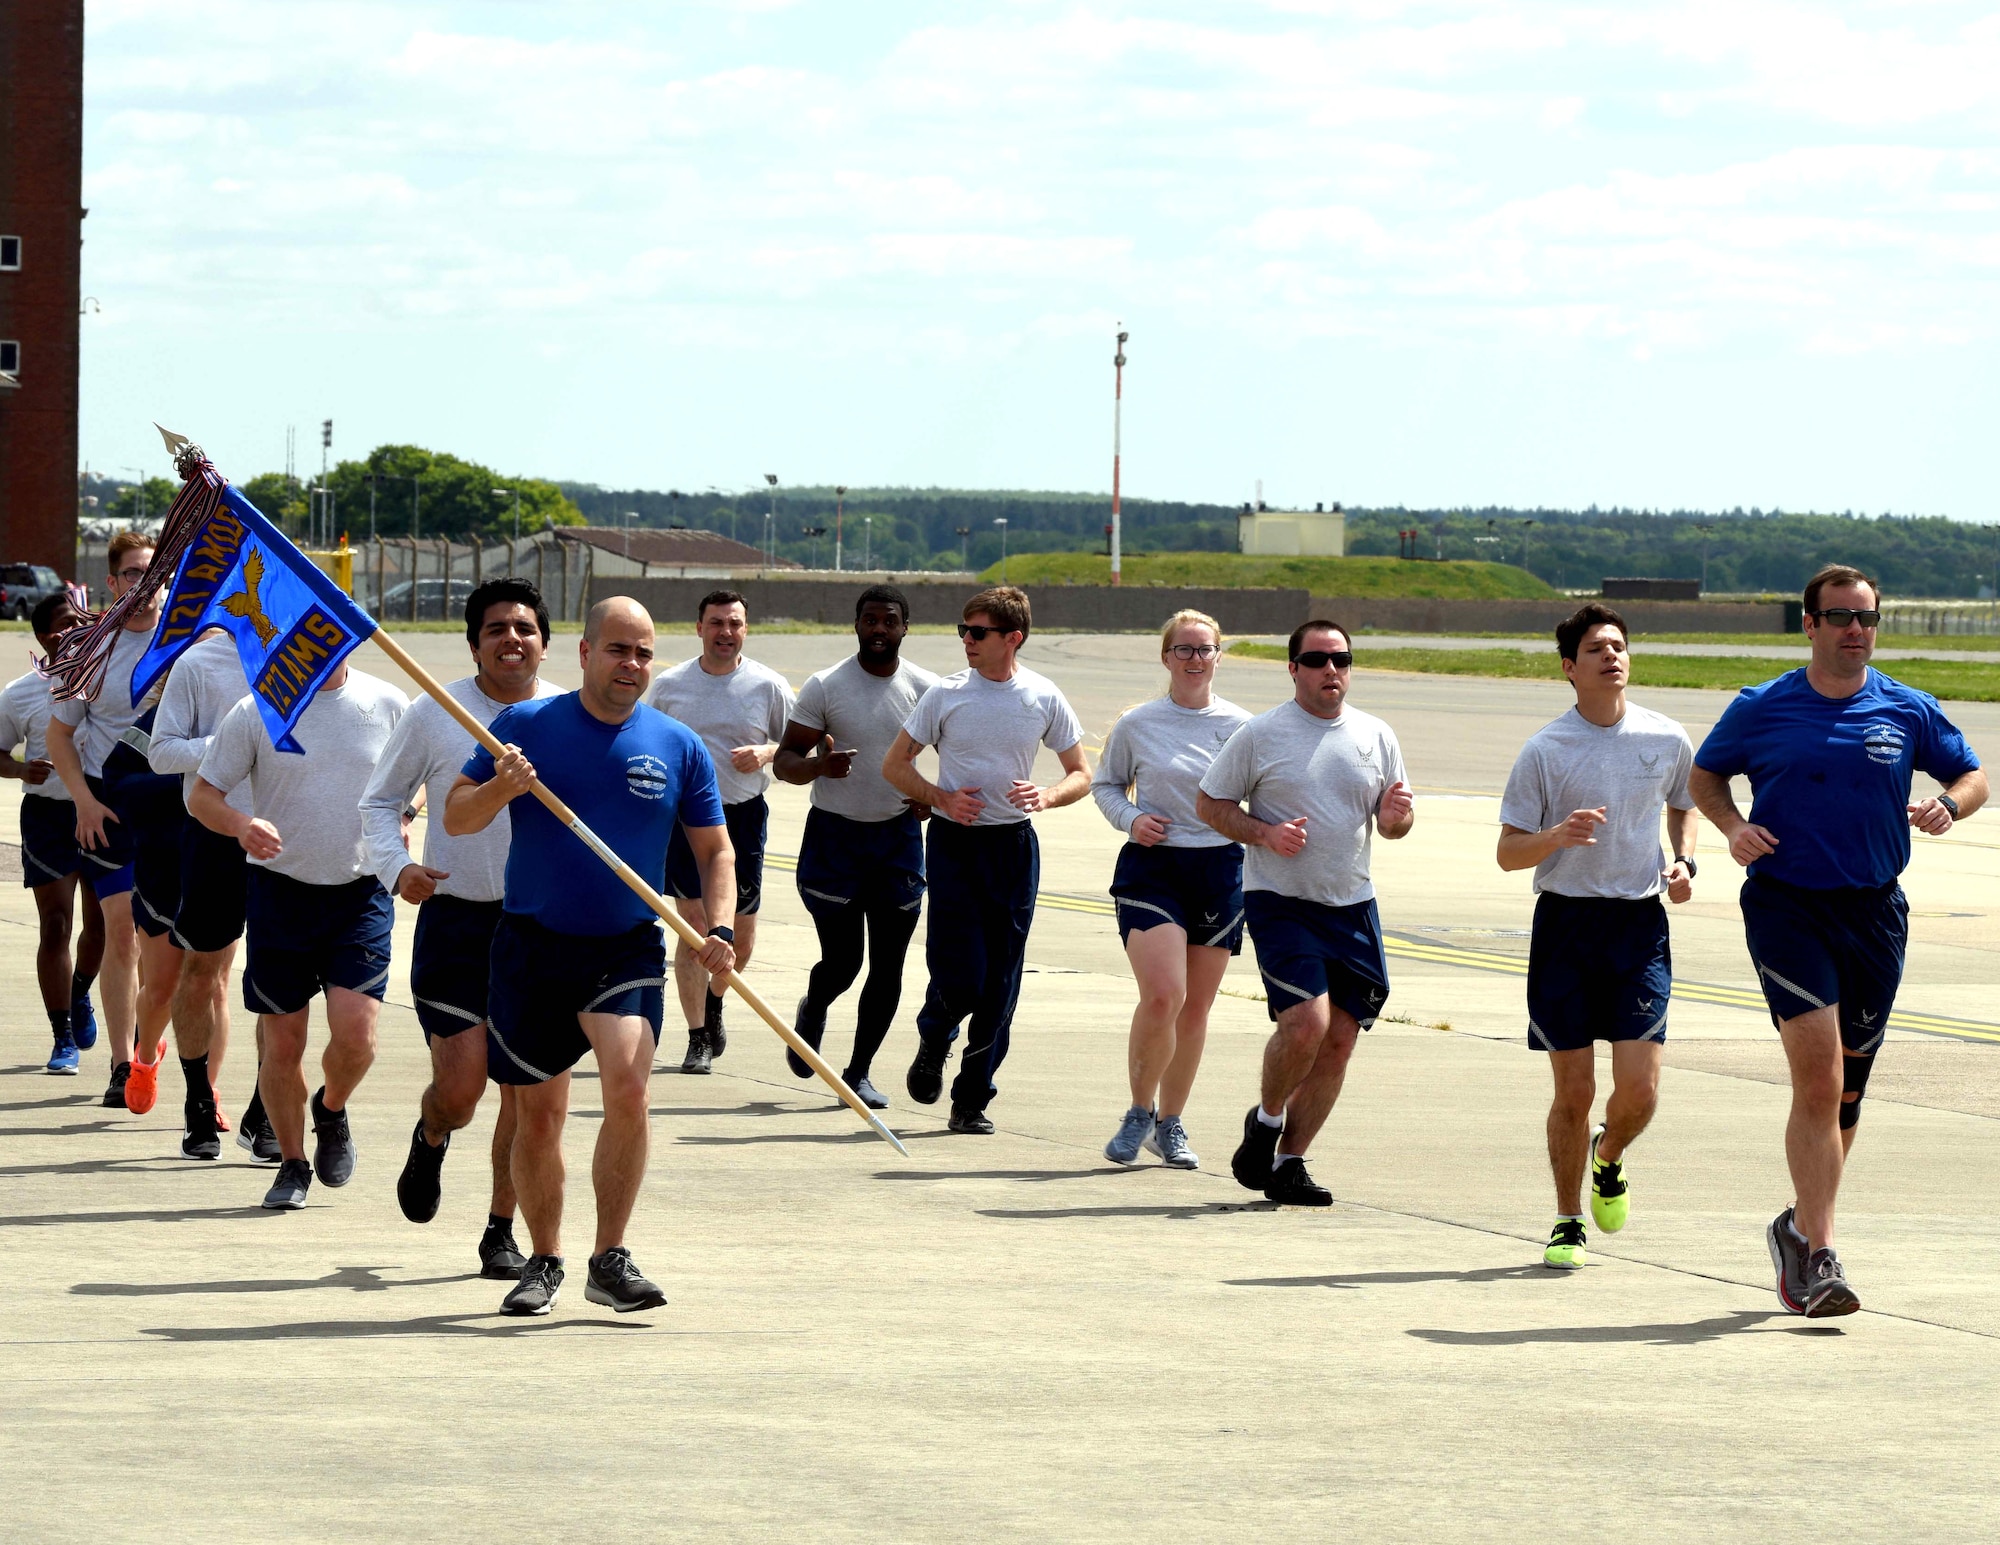 Airmen from the 727th Air Mobility Squadron run during the Port Dawg Memorial Run at RAF Mildenhall, England, May 15, 2020. Air transportation community members, commonly referred to as “Port Dawgs,” are responsible for military logistics-related aerial ports across the Air Force. (U.S. Air Force photo by Senior Airman Brandon Esau)